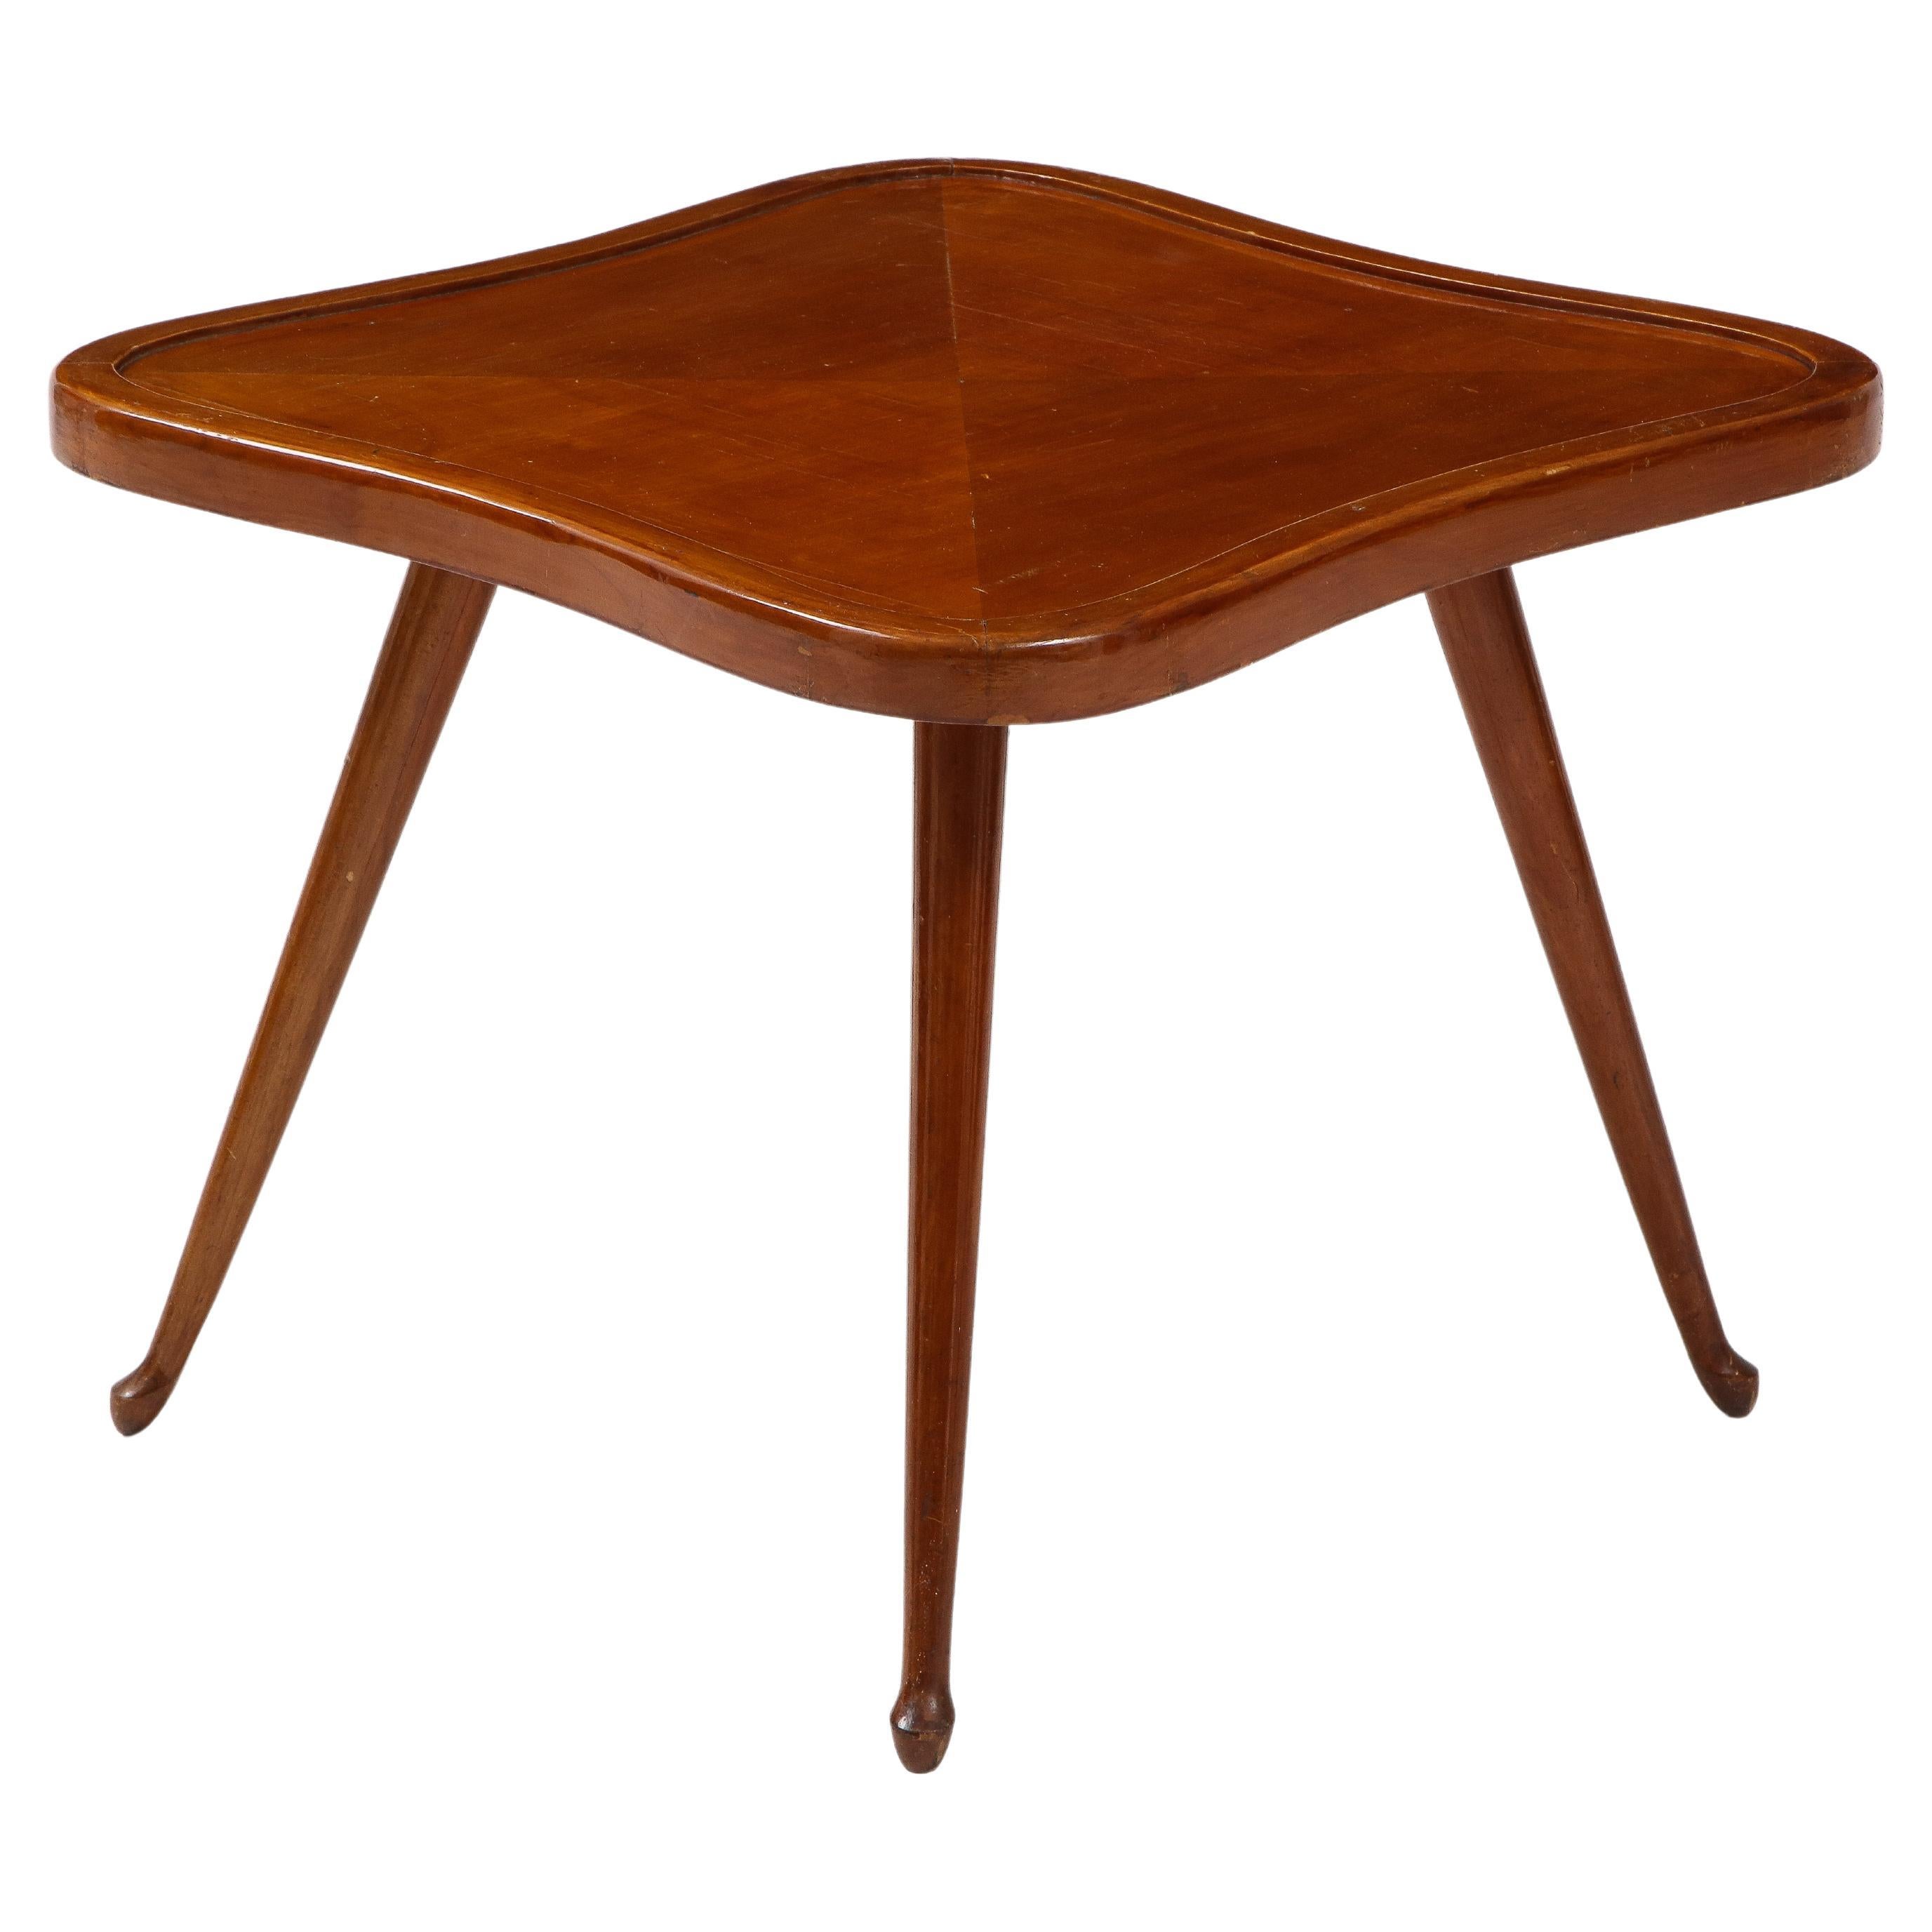 Paolo Buffa 'Attrib.' Occasional Clover Shaped Table, c. 1950-60